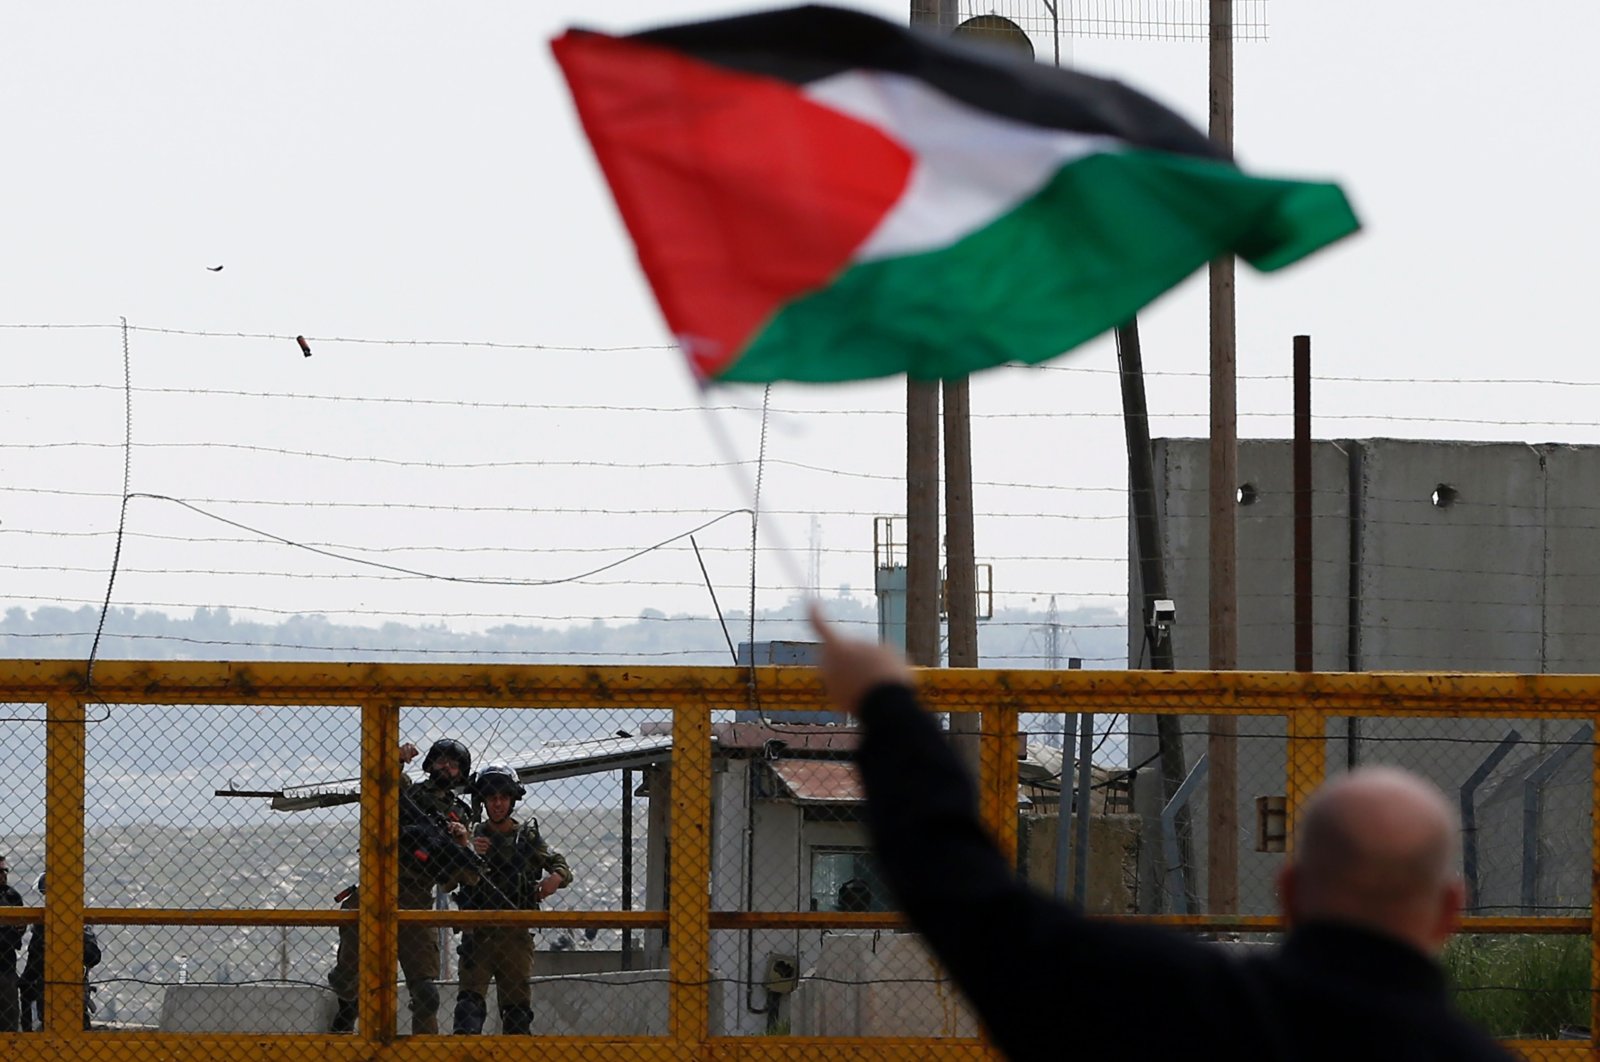 A Palestinian protester waves his national flag in front of Israeli security forces outside the compound of the Israeli-run Ofer prison near Betunia in the Israeli occupied West Bank, March 30, 2016. (AFP Photo)